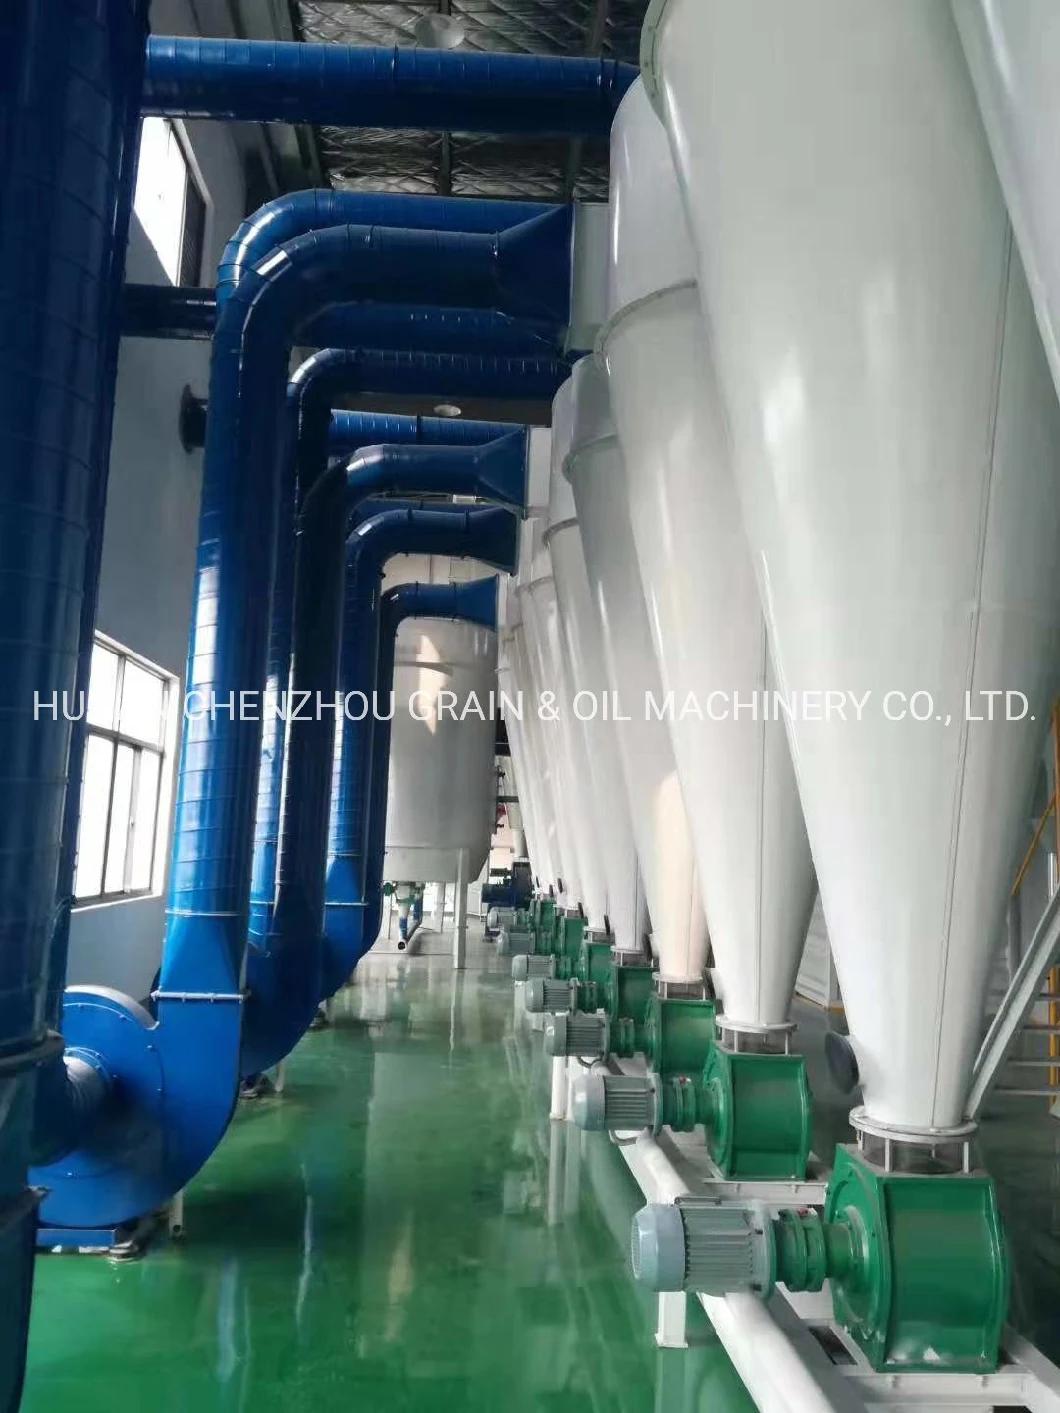 2000tons Silos Final Rice Silos for Rice Mill Rcie Paddy Brown Rice Storage